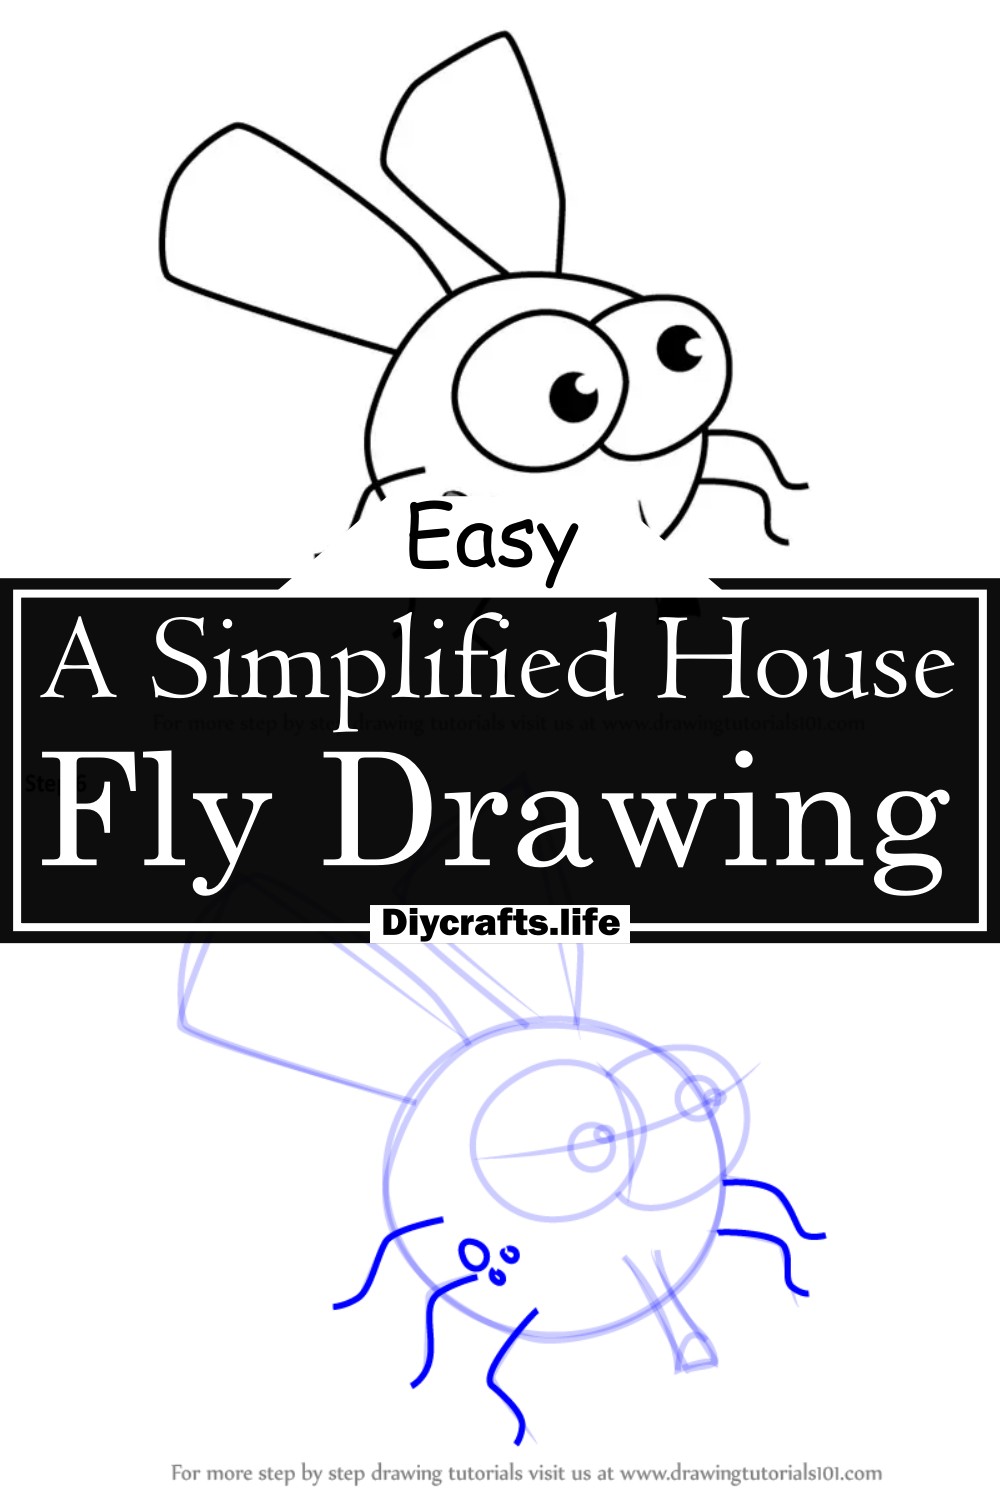 A Simplified House Fly Drawing